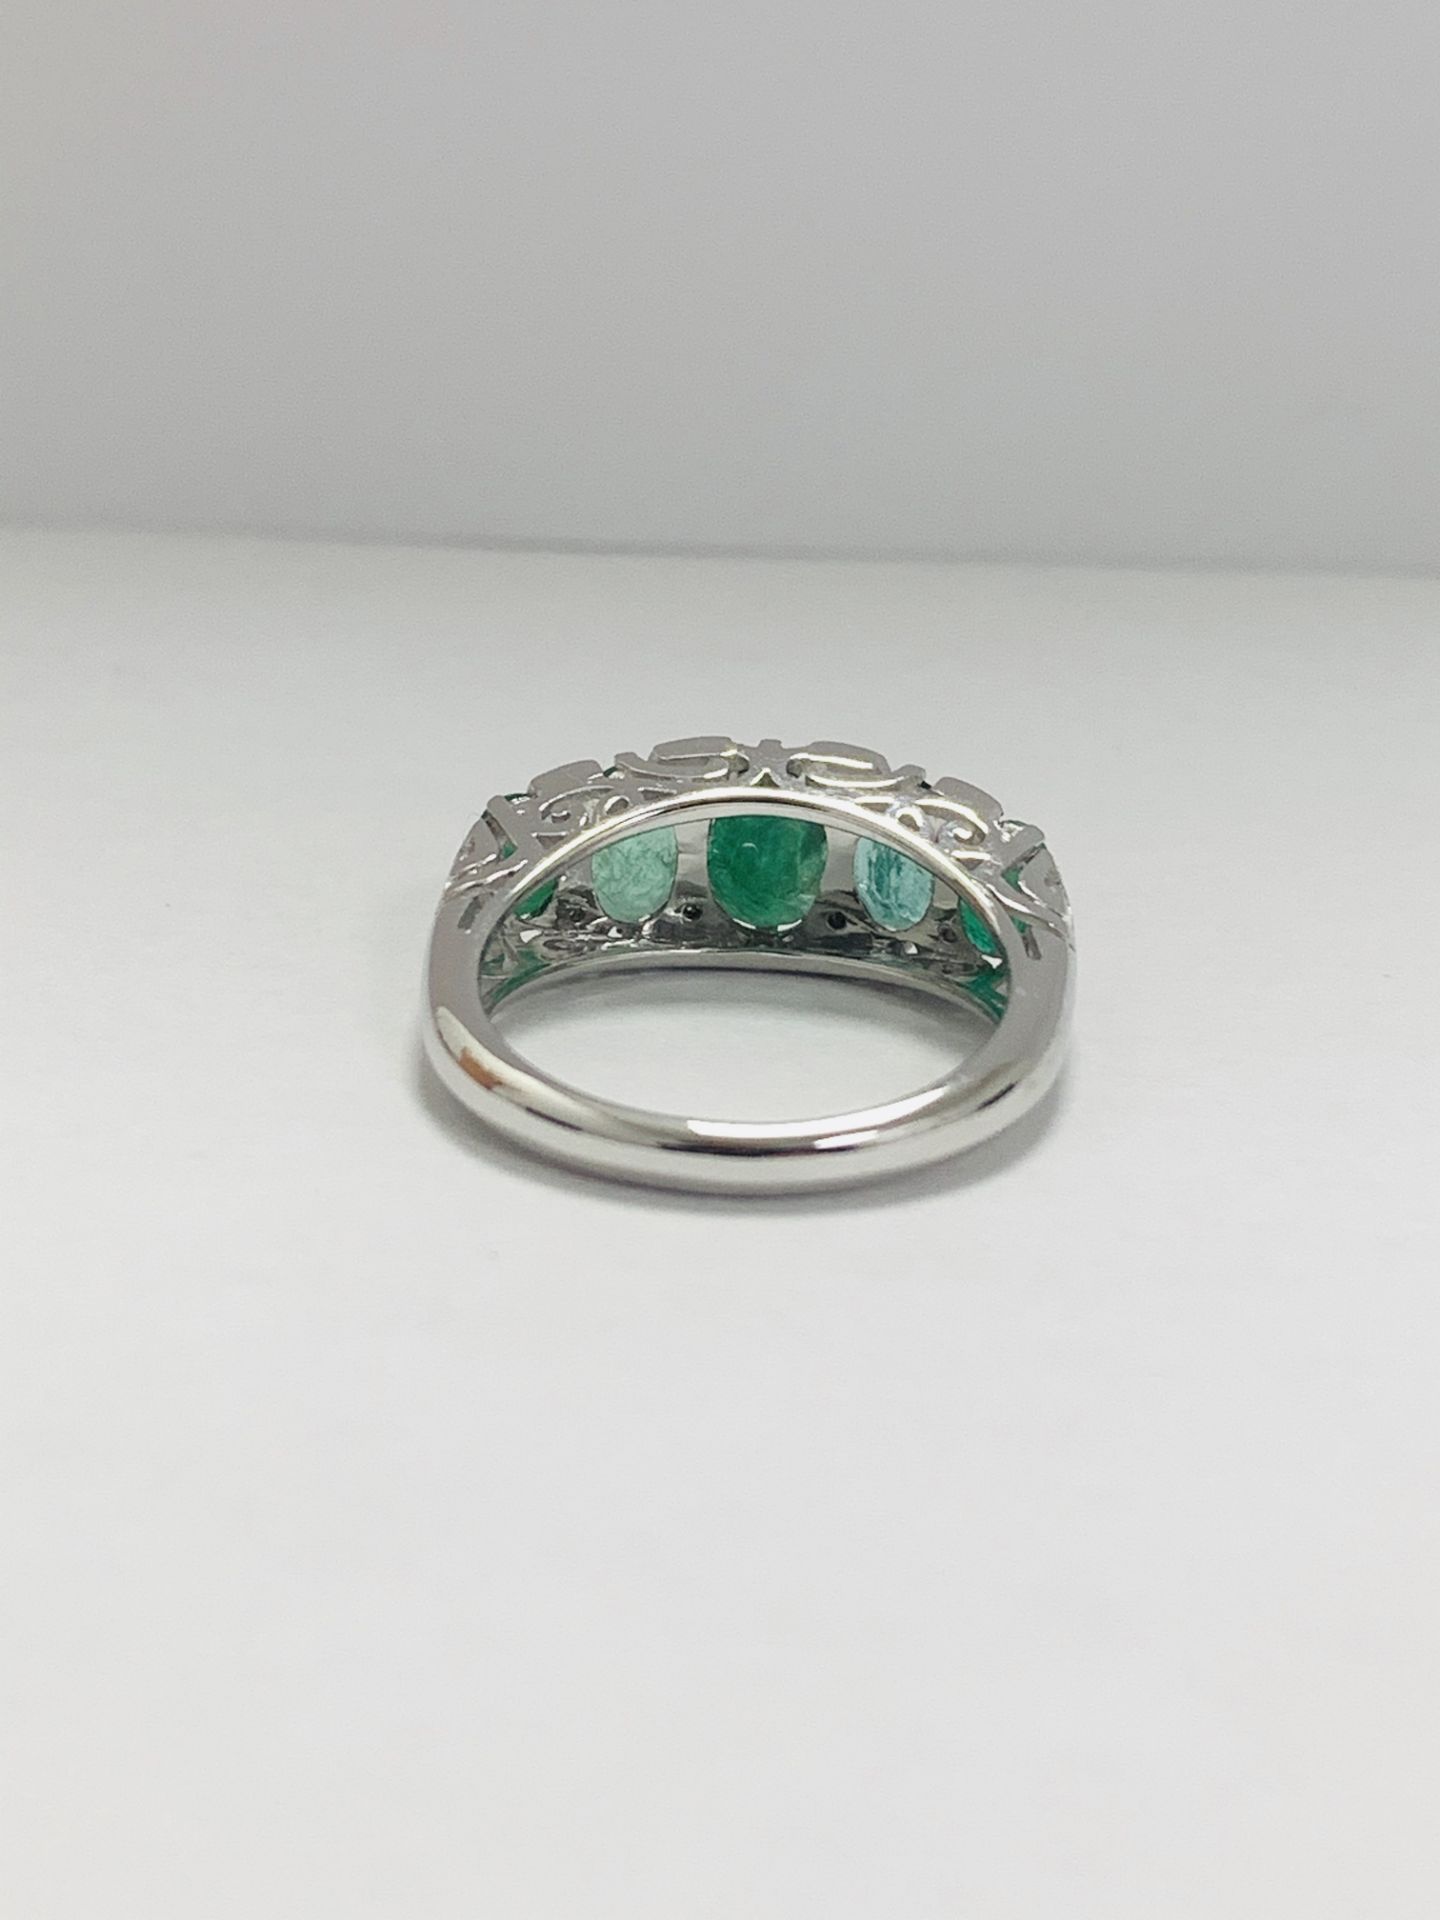 14Ct White Gold Emerald And Diamond Ring - Image 4 of 9